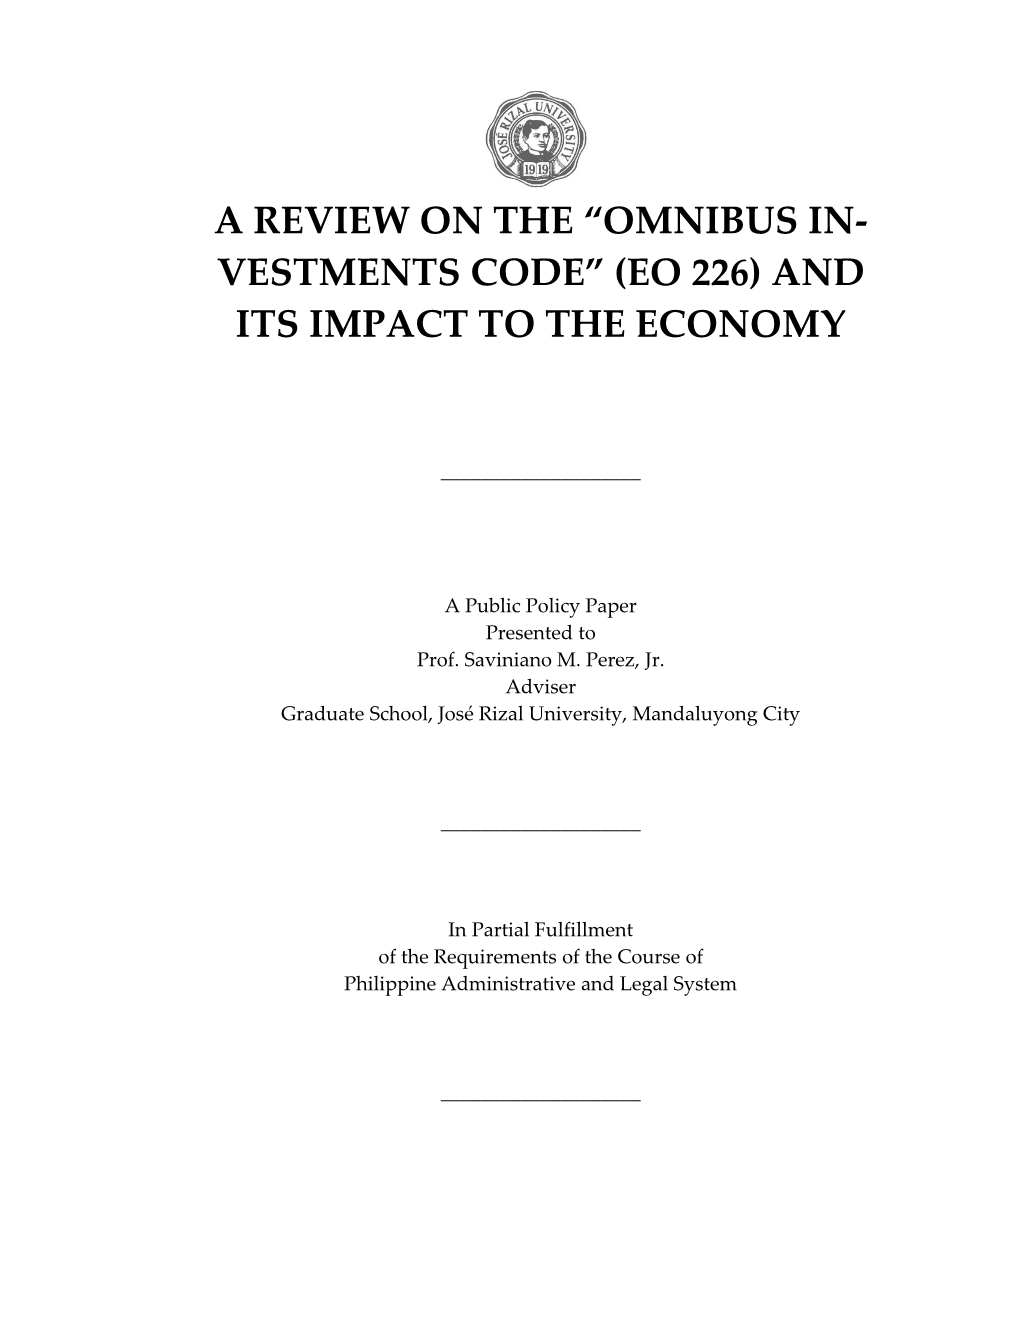 A Review on the Omnibus Investments Code (Eo 226) and Its Impact to the Economy